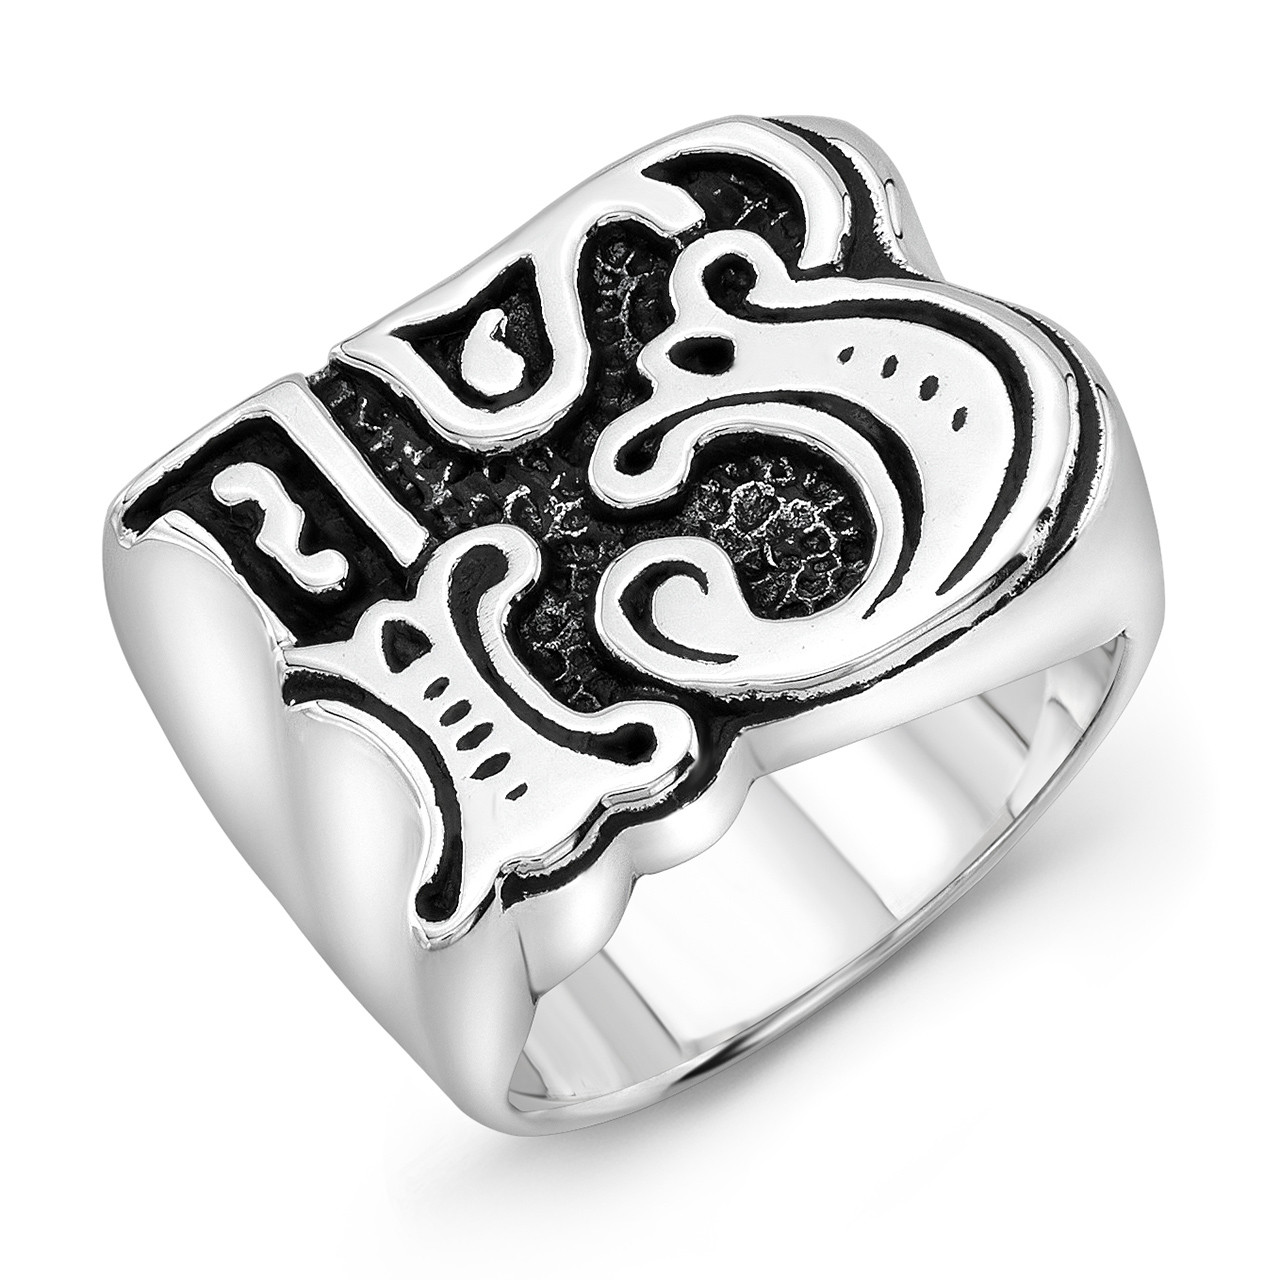 Room 101 Lucky 13 Sterling Silver Ring